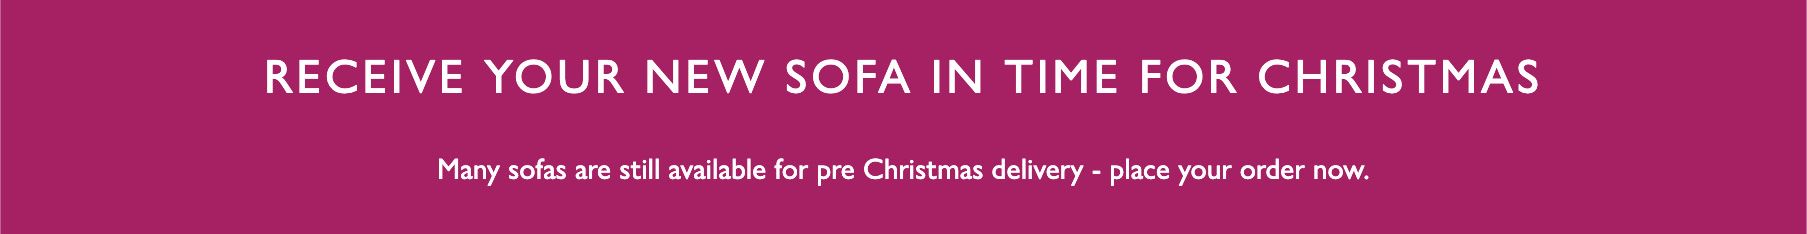 Shop sofas in time for Christmas.